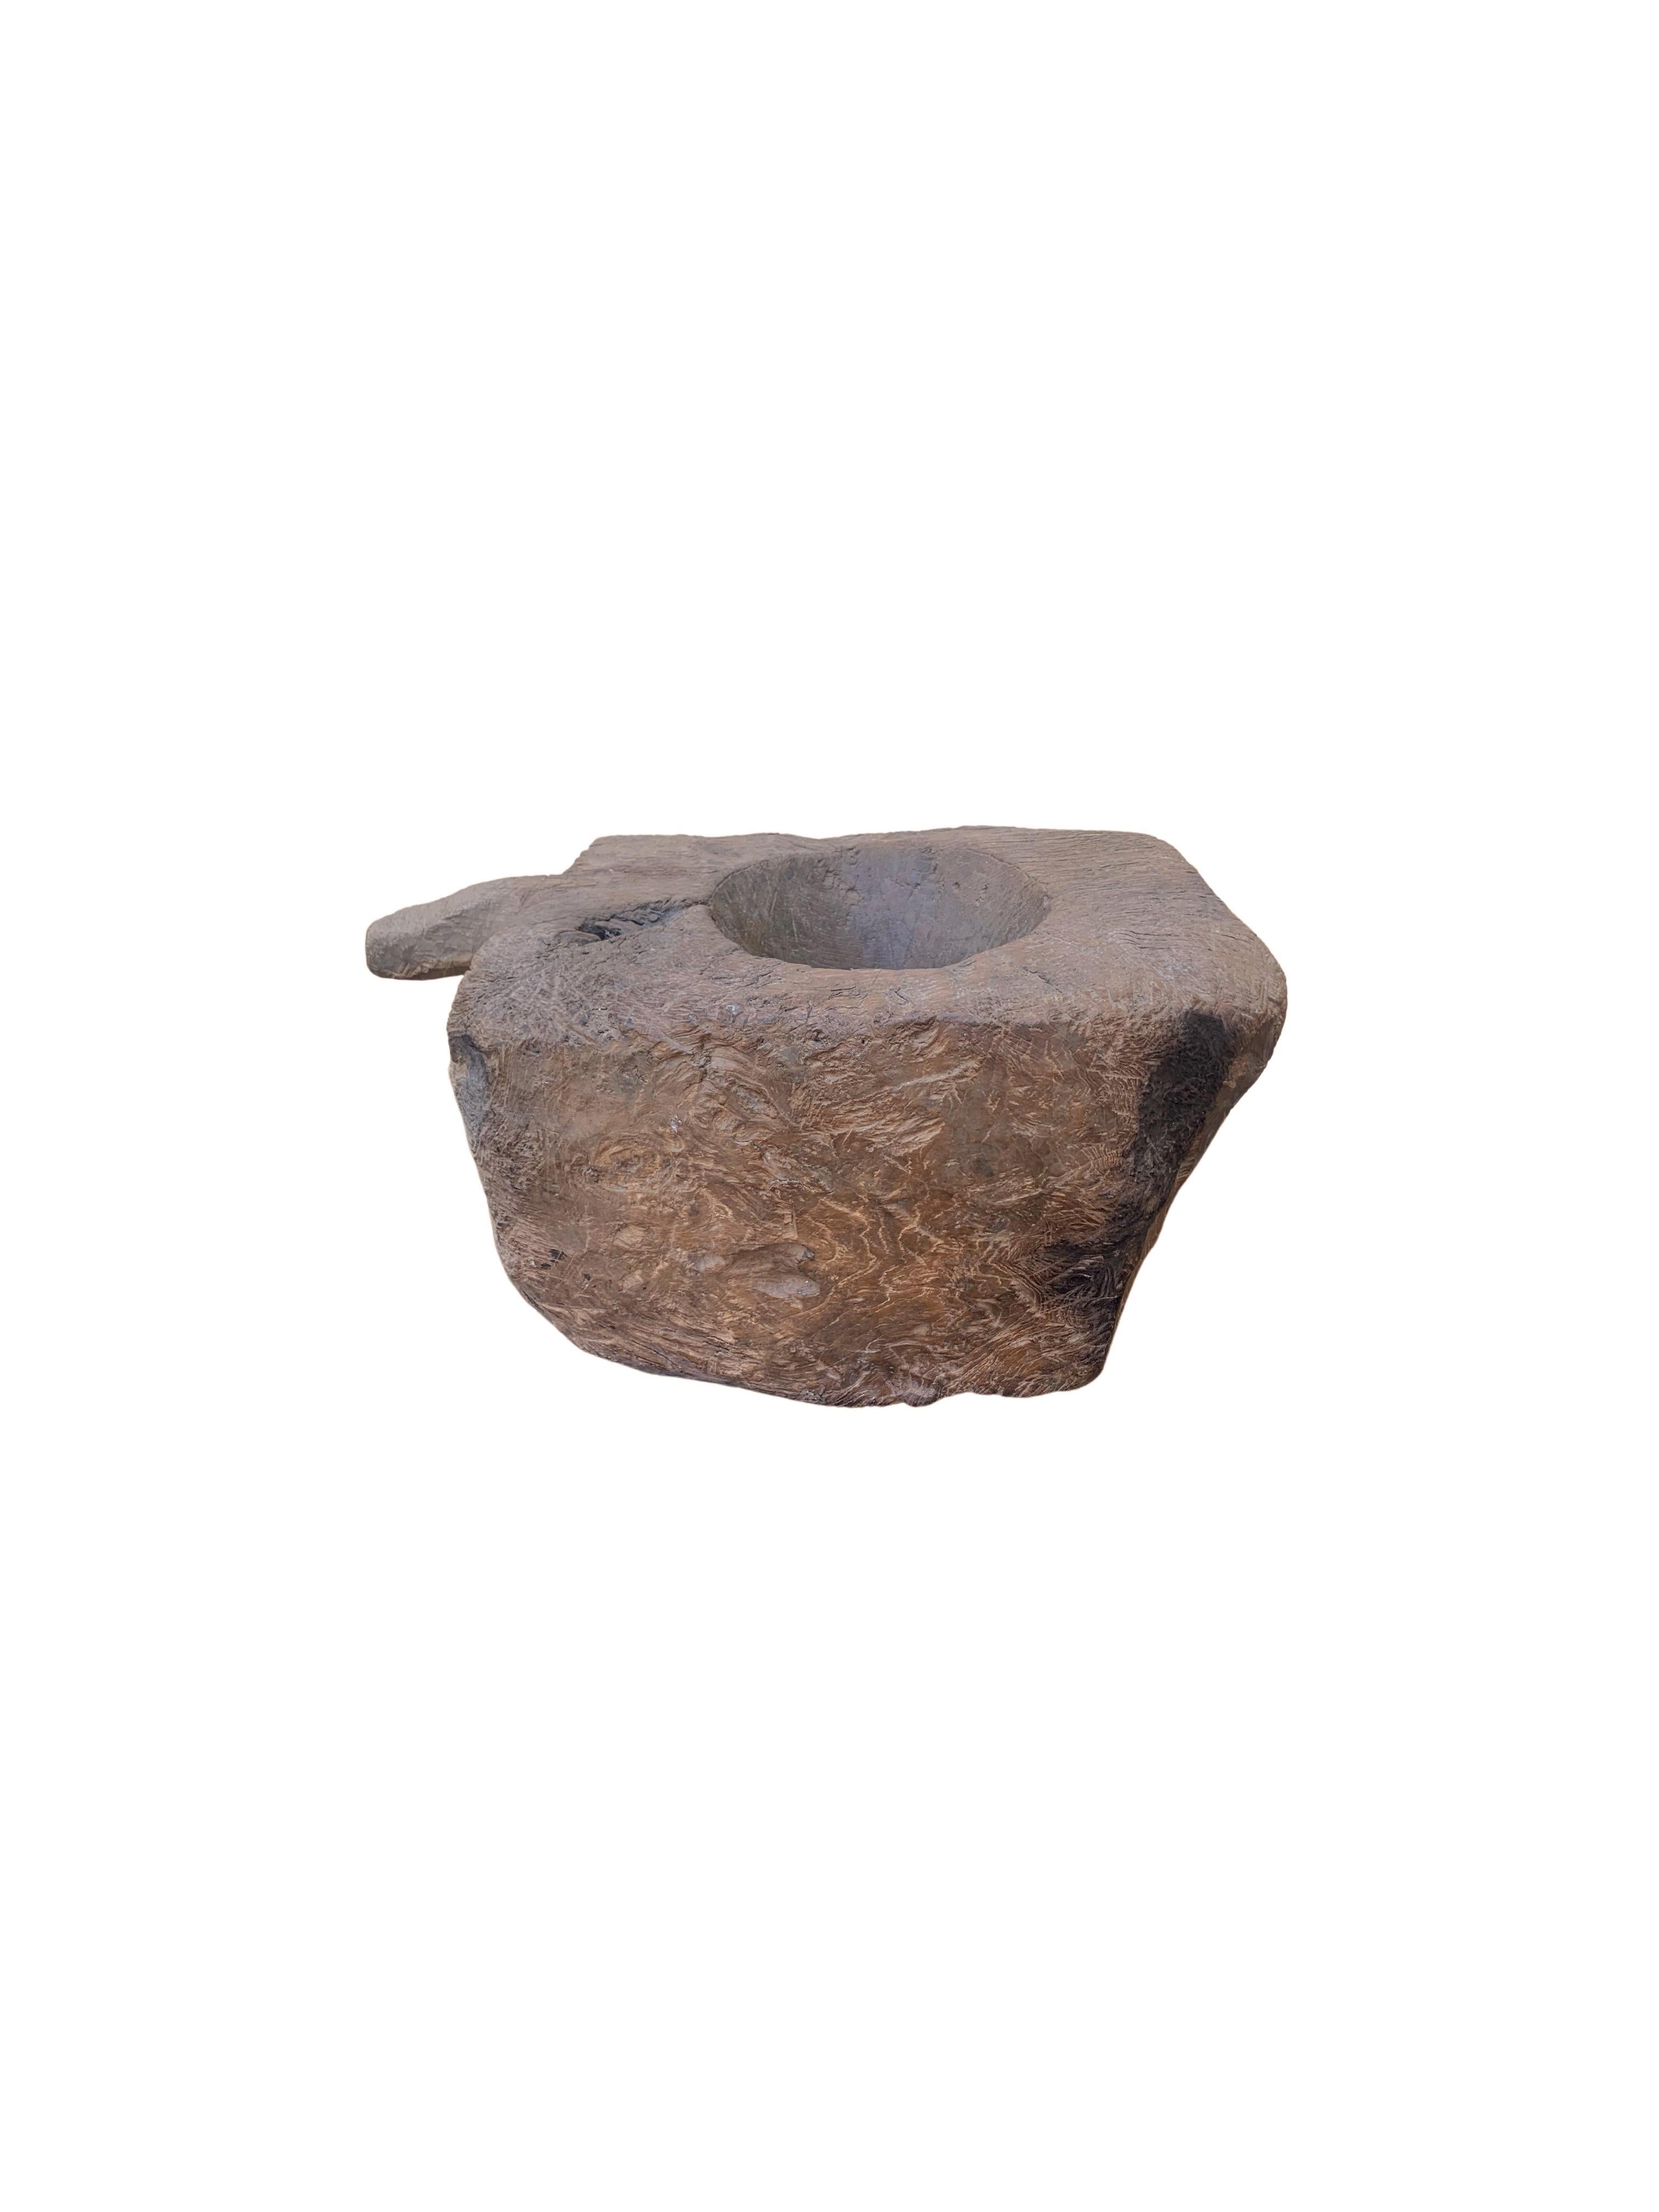 Organic Modern Solid Teak Granary Mortar from Java, Indonesia, C. 1950 For Sale